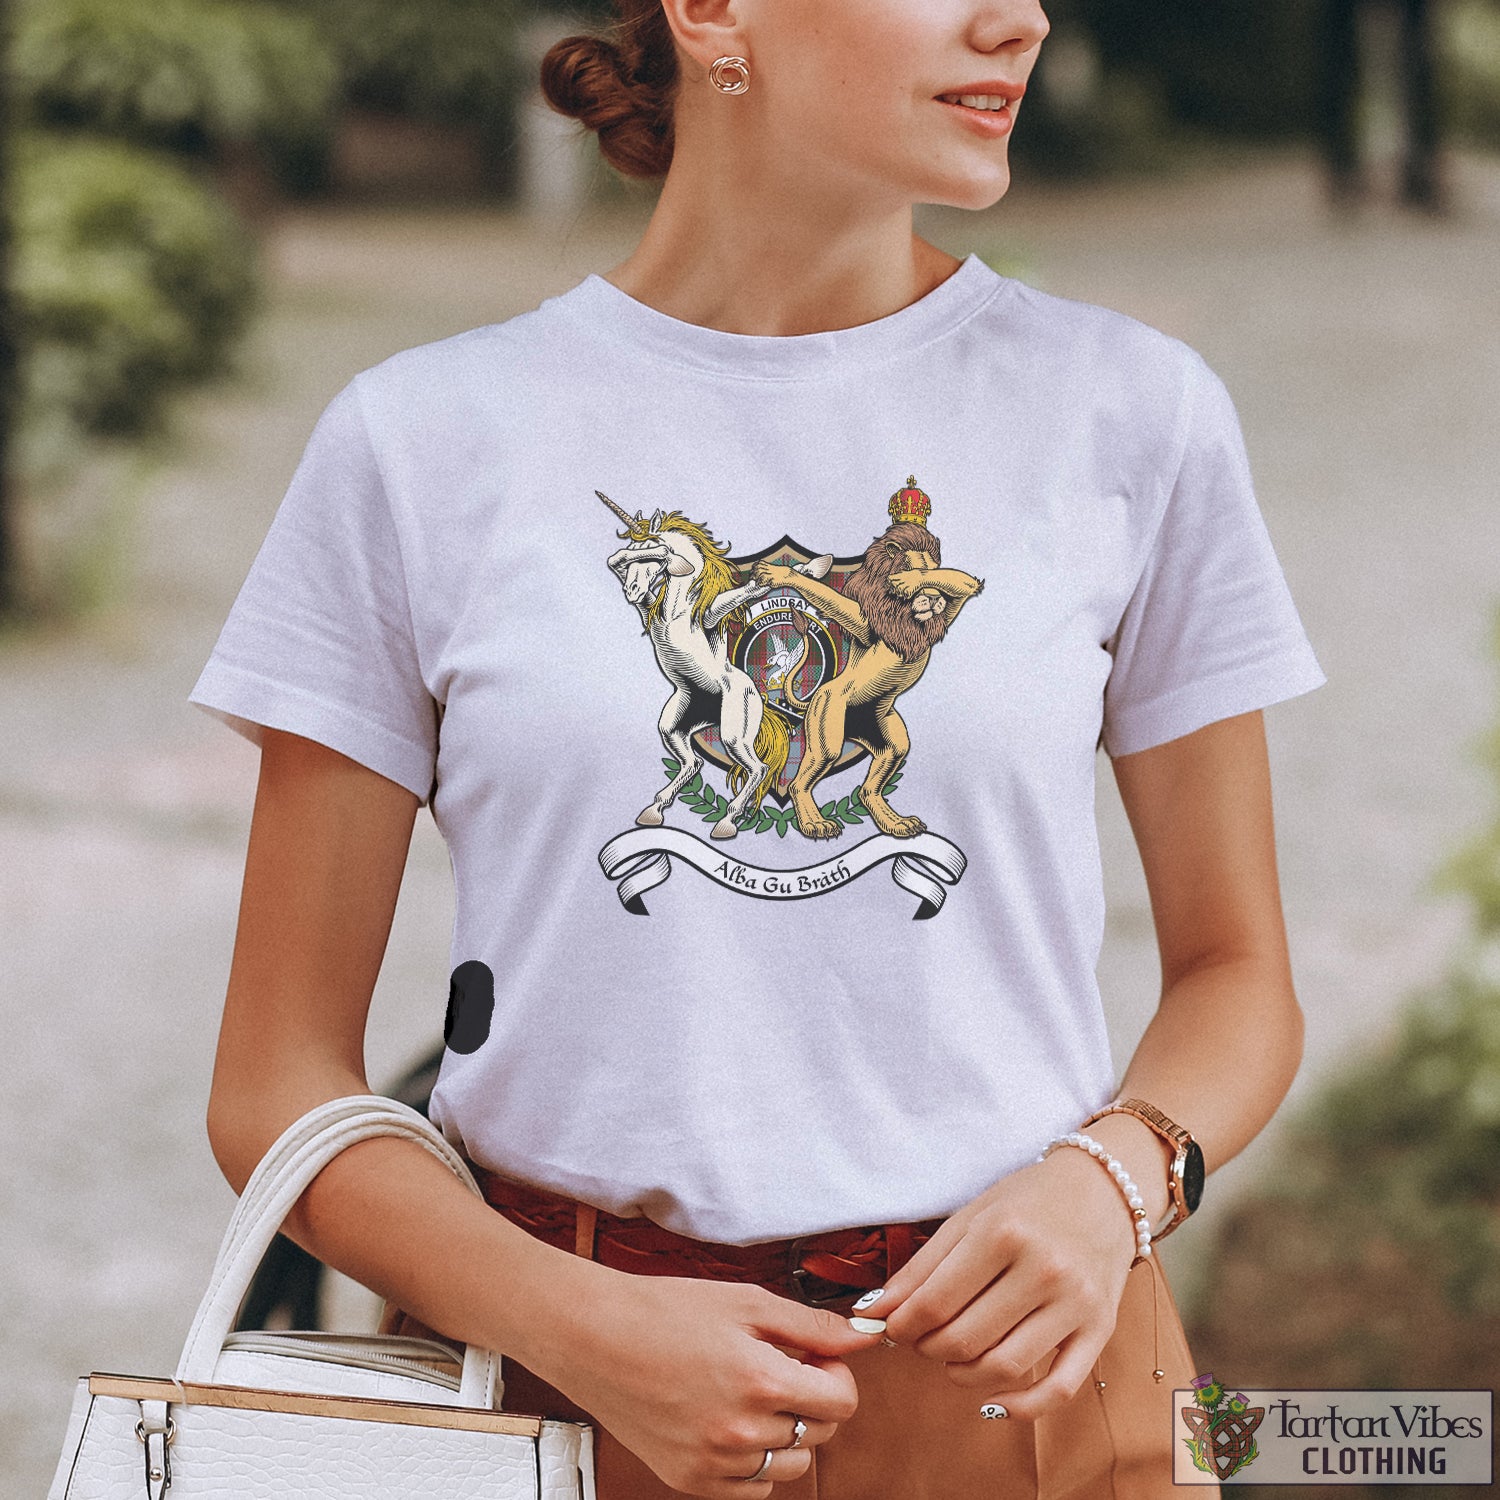 Tartan Vibes Clothing Lindsay Dress Red Family Crest Cotton Women's T-Shirt with Scotland Royal Coat Of Arm Funny Style